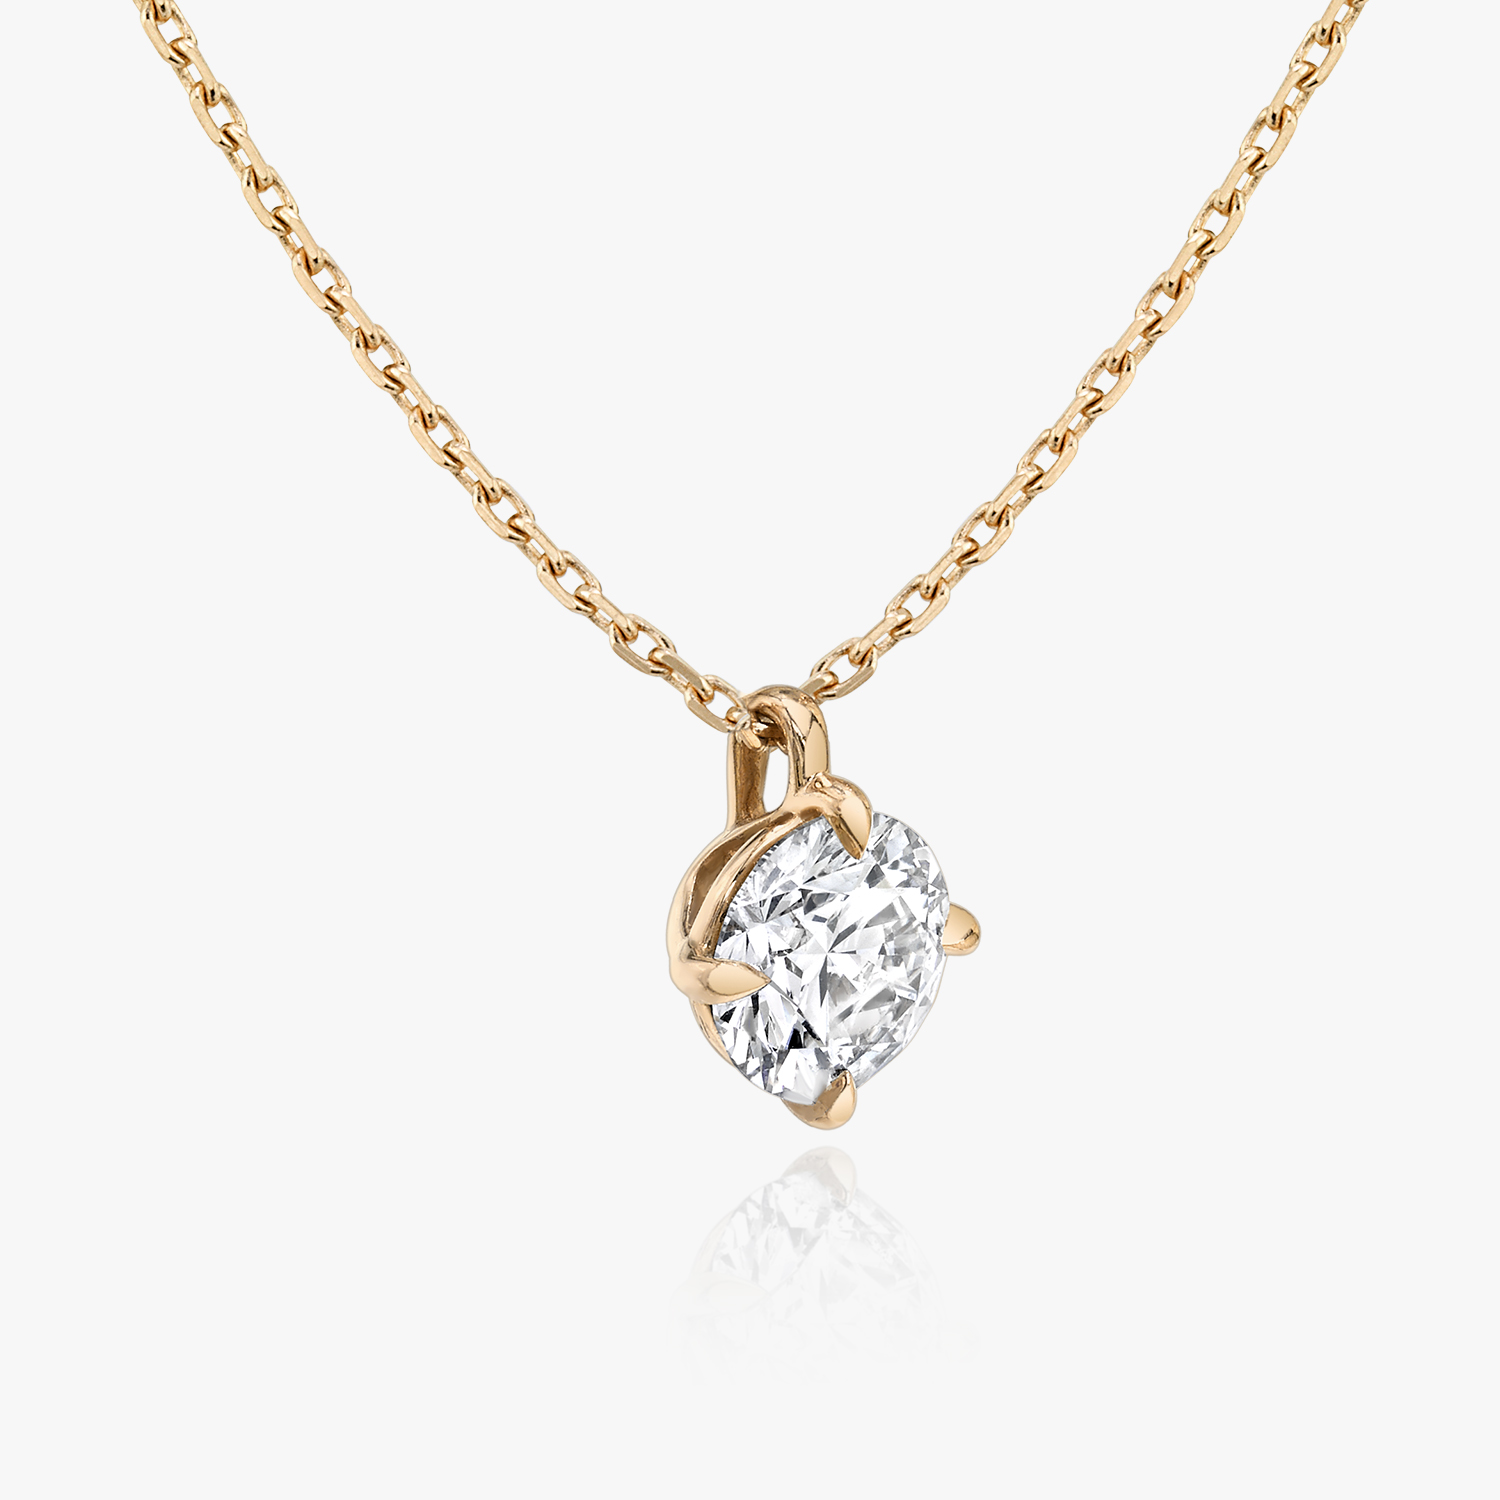 Buy Antique Style Bezel Setting Pendant Necklace in 925 Sterling Silver in  - 0.08 Carat CZ Diamond With Gold Plated Chain / Diamond Necklace For Women  | www.vvsjewelrystore.com